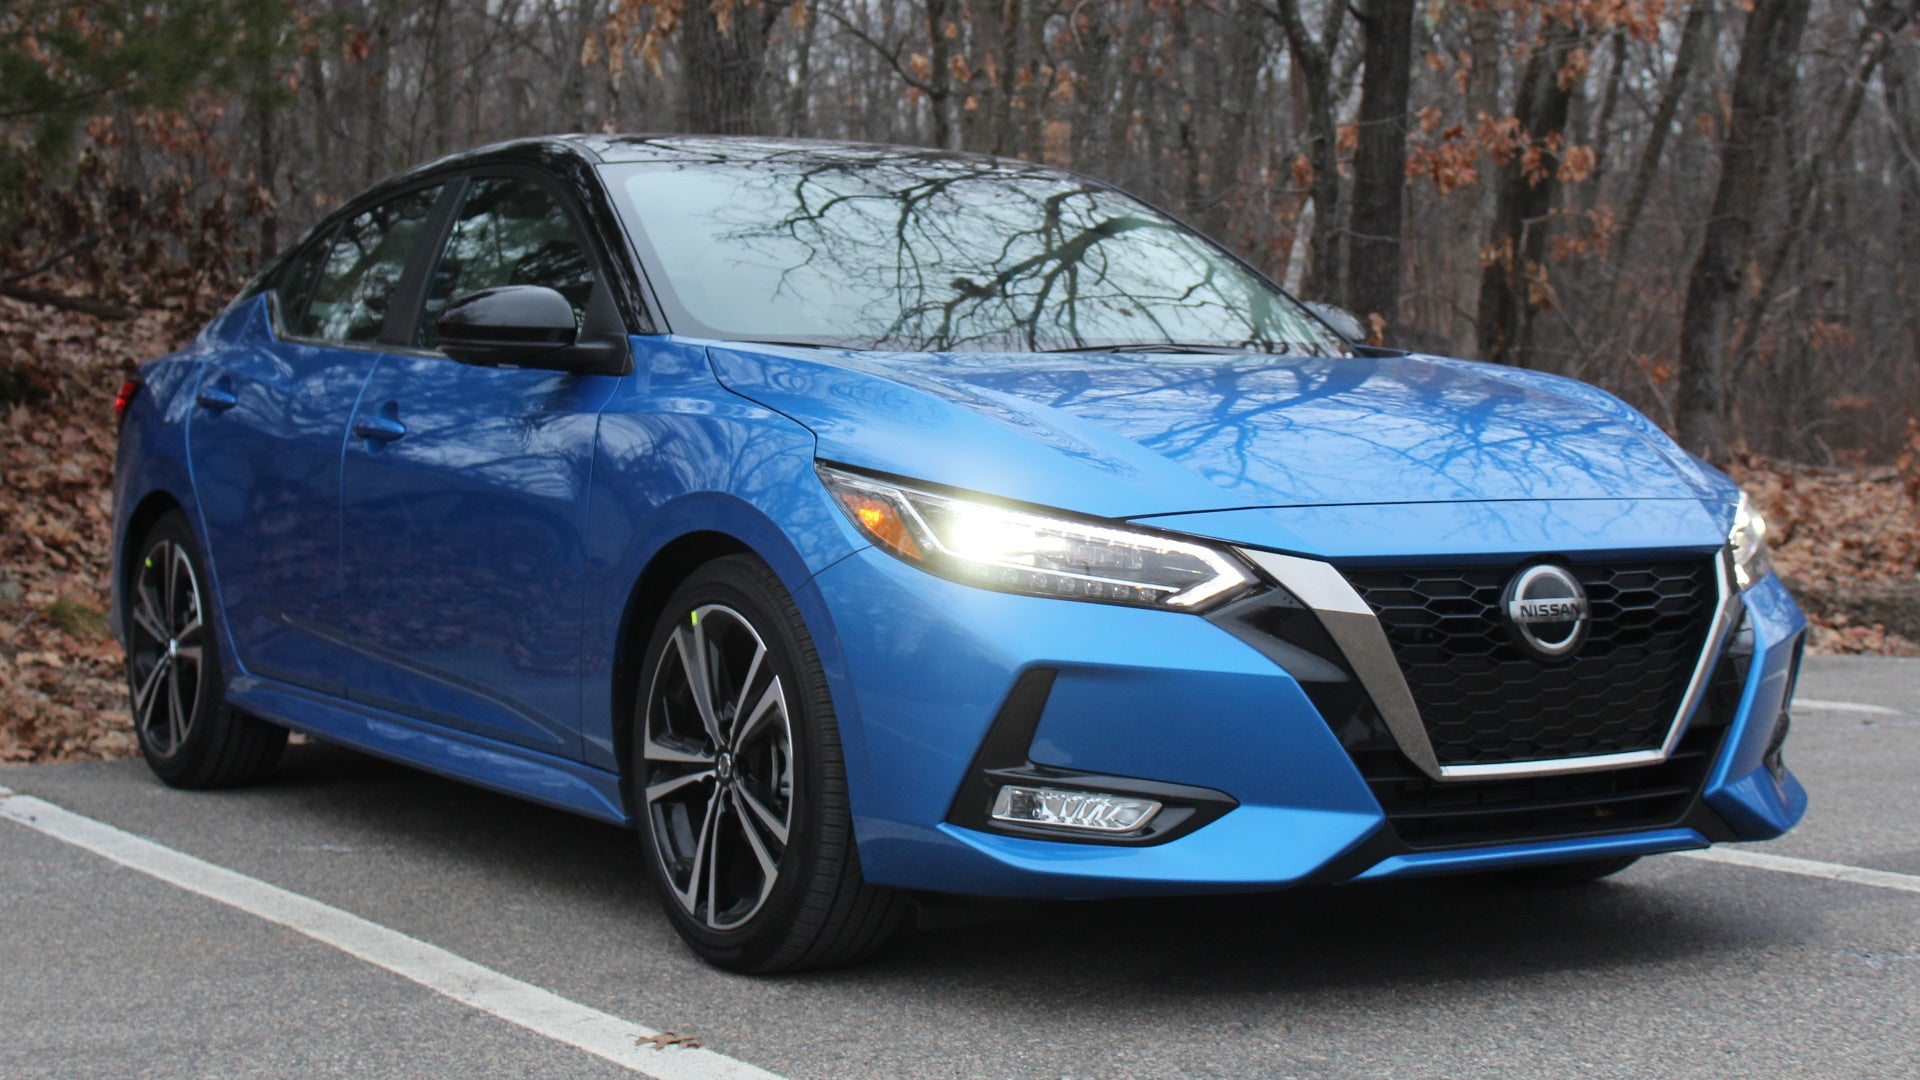 2021 Nissan Sentra Review: I Wanted This Car to Give Up